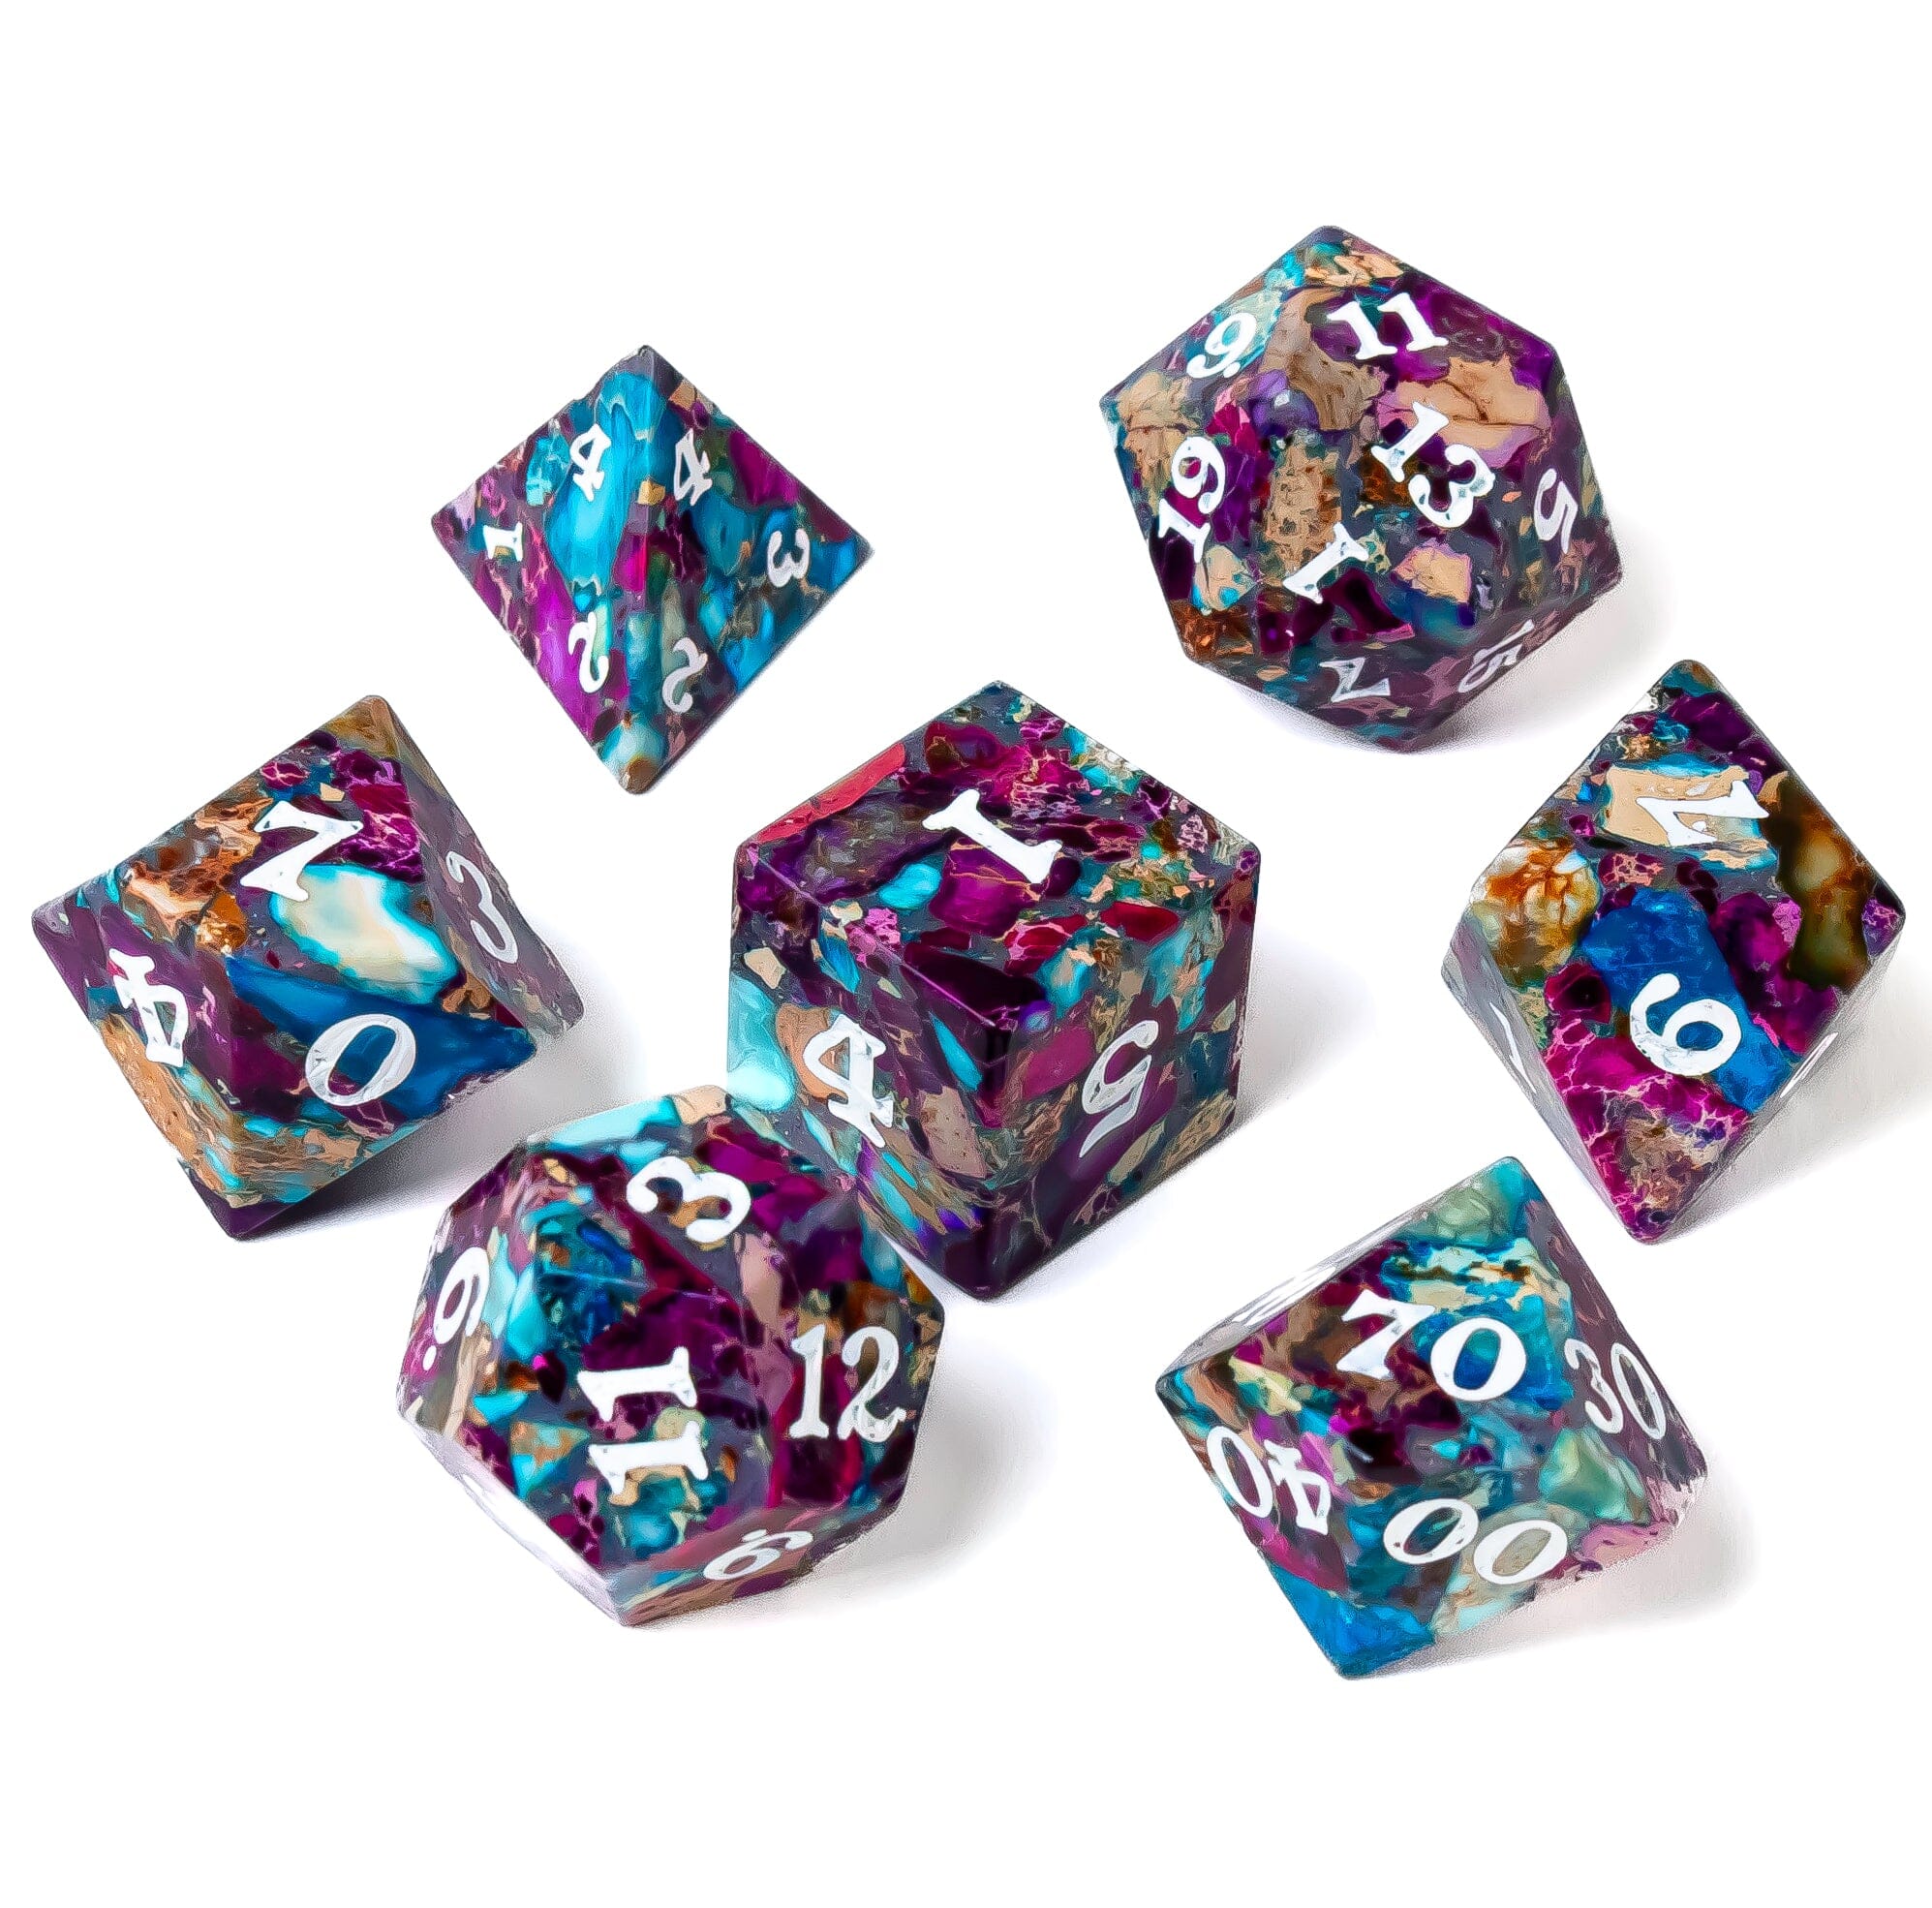 Wizard Stone Dice - Chaotic Mist